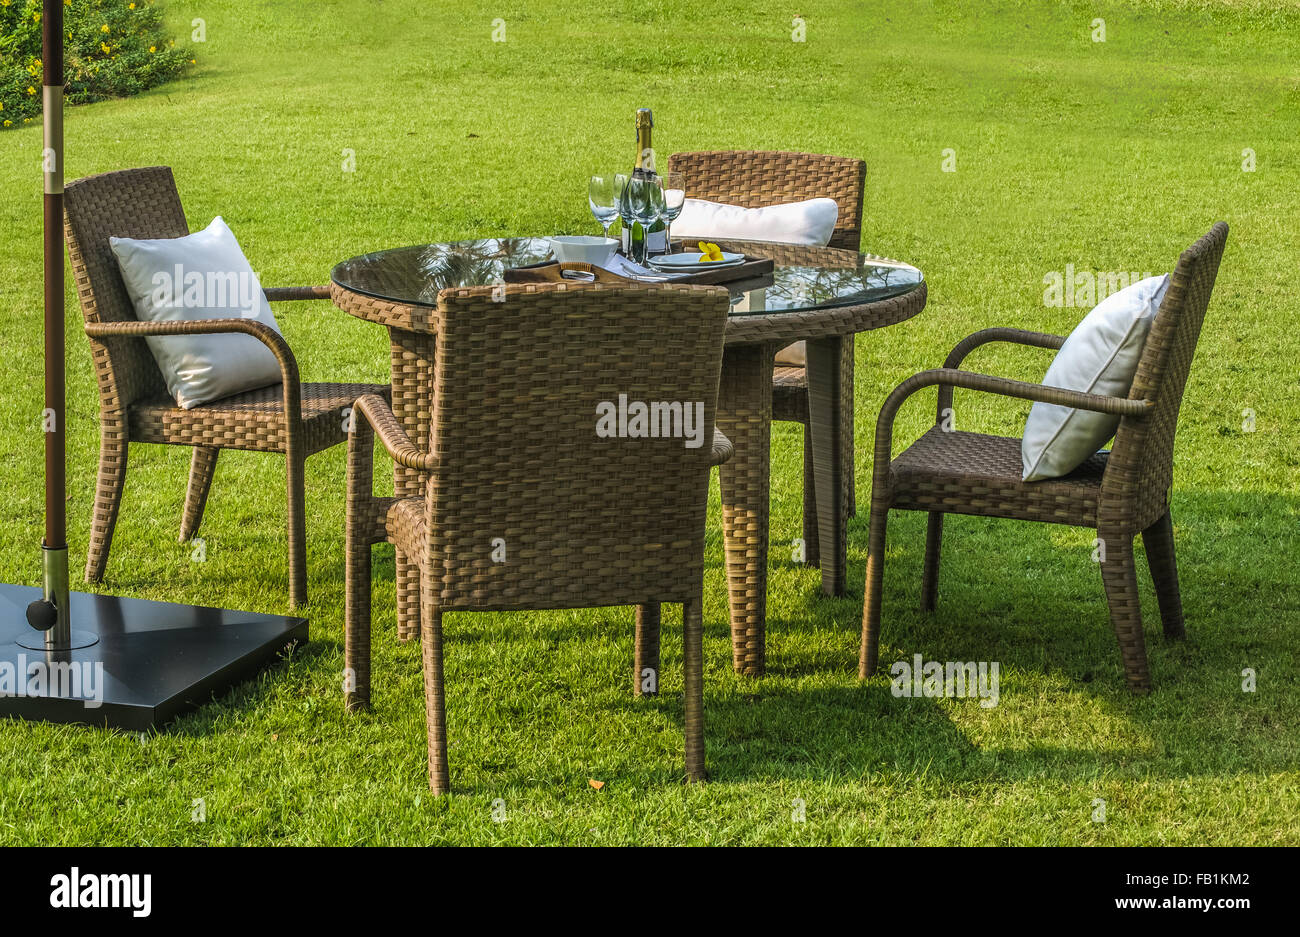 Rattan furniture, table and chairs outdoors Stock Photo